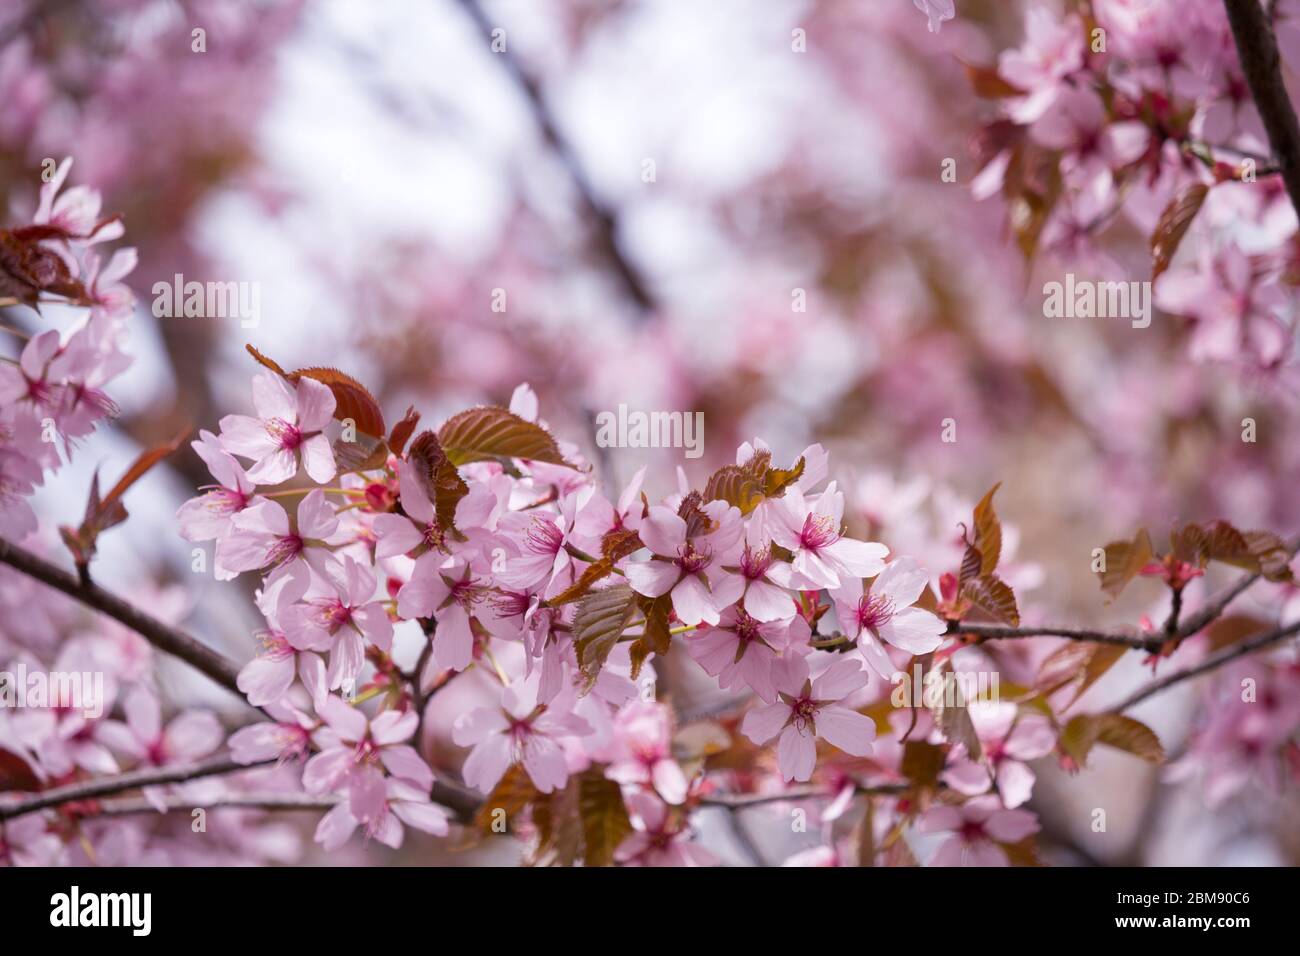 Beautiful and fresh spring backgrund with blurry light pink cherry blossom tree branches Stock Photo